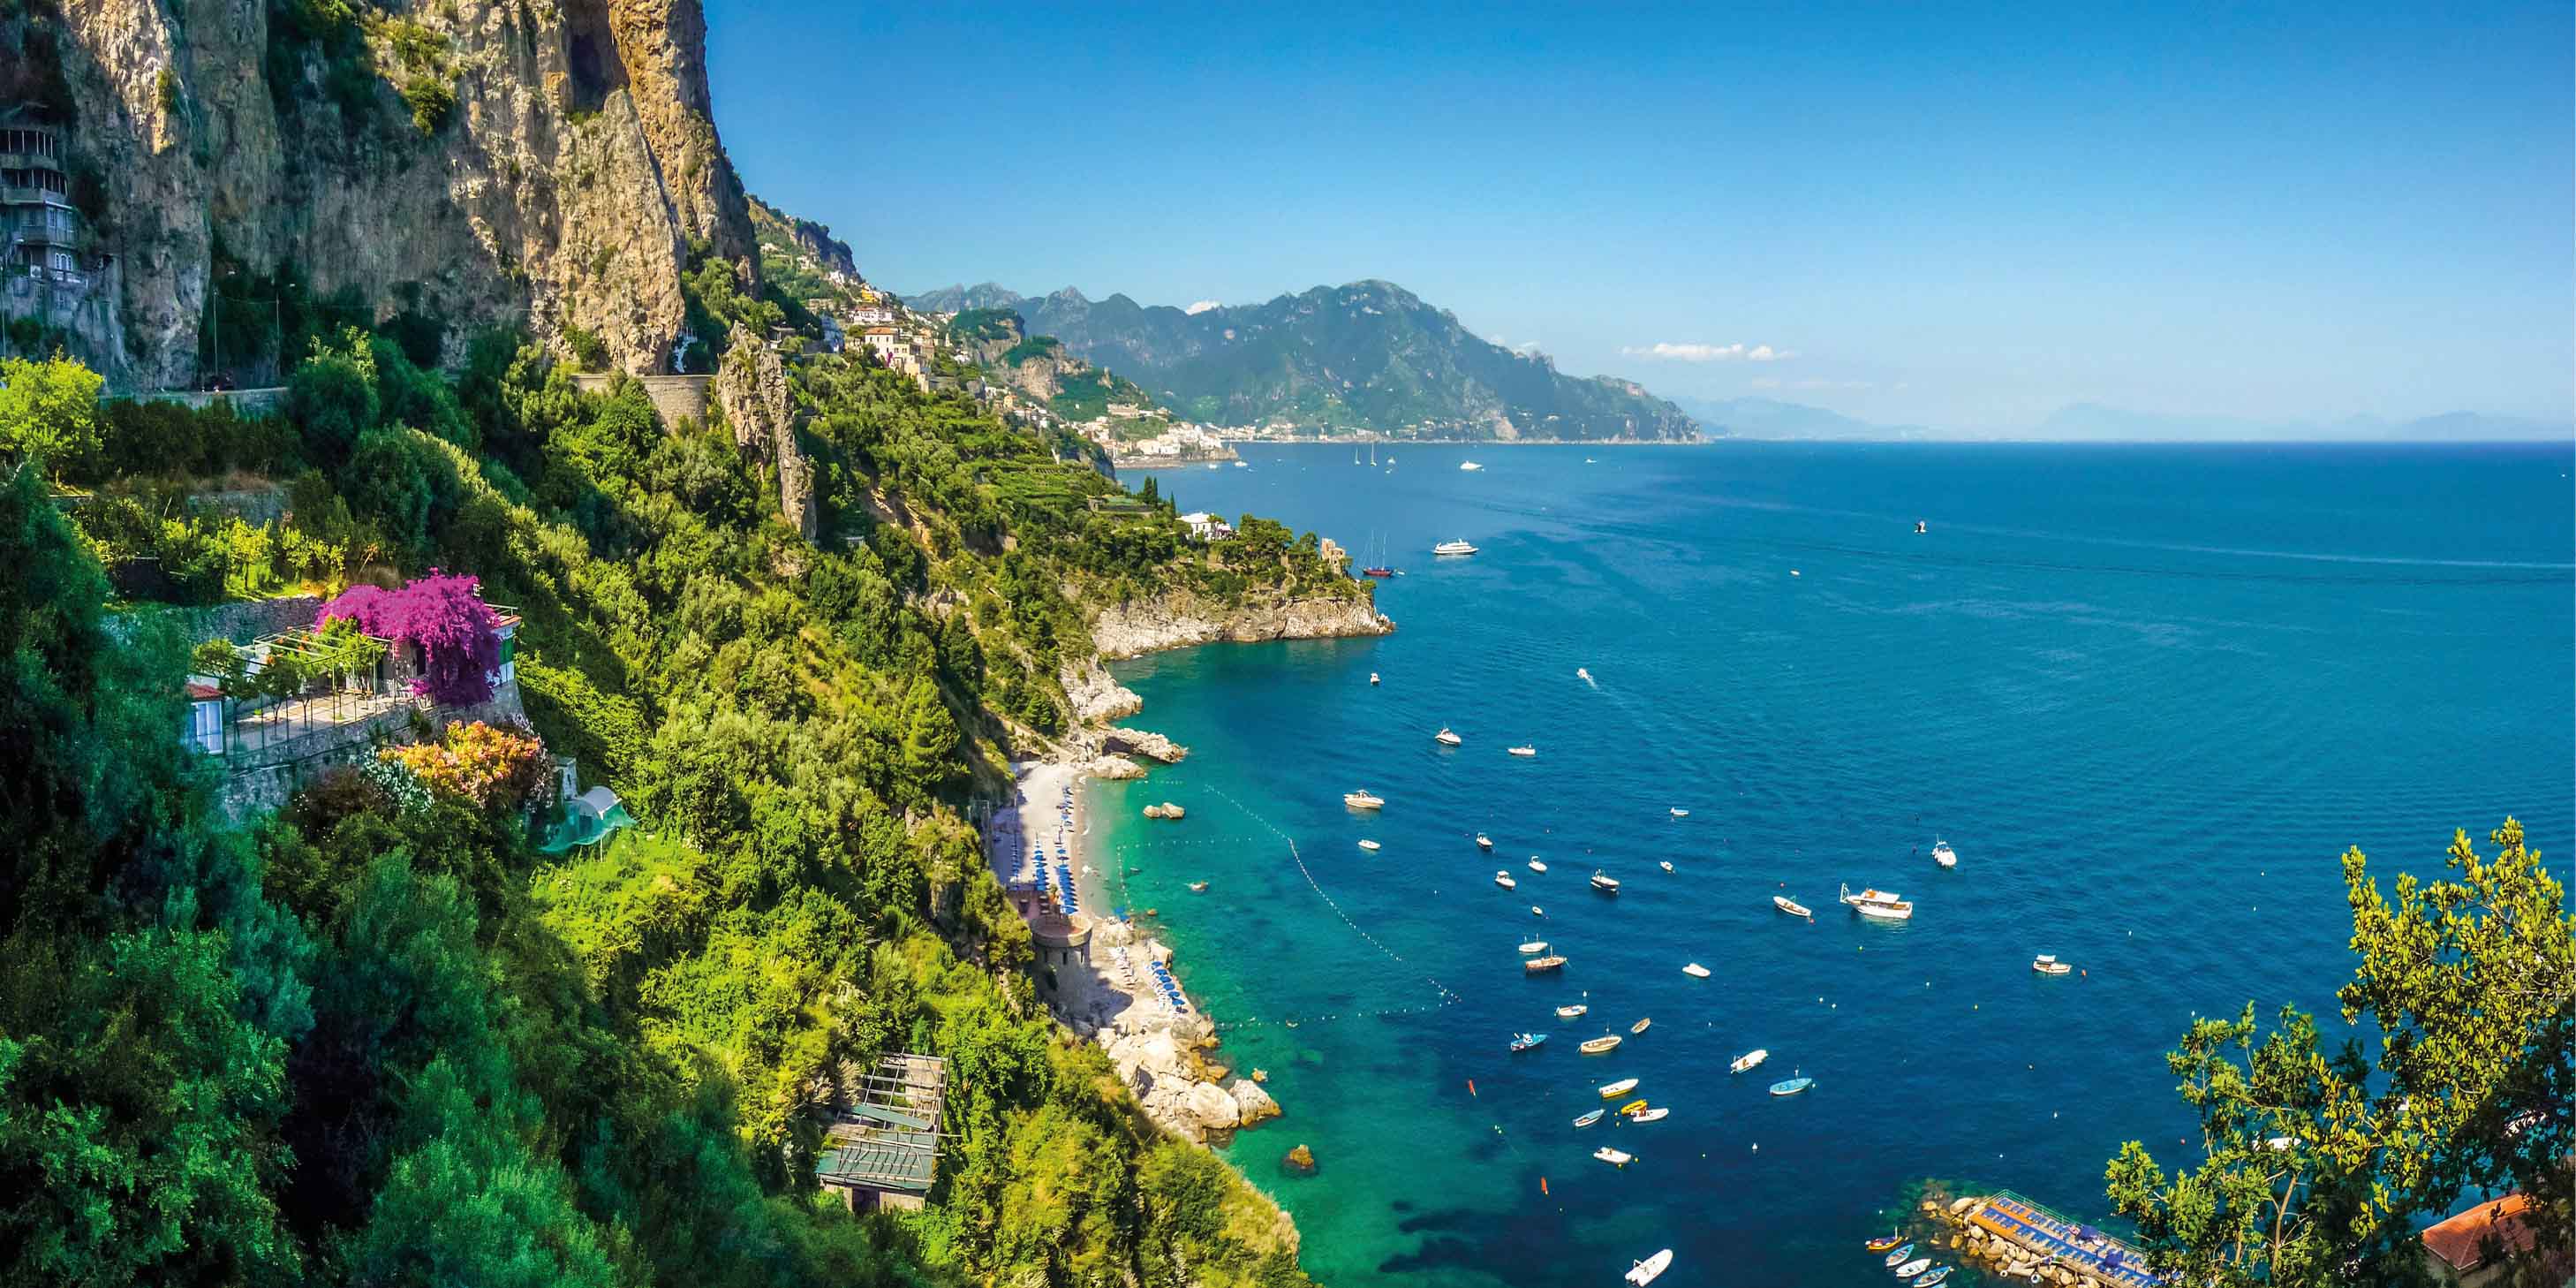 Amalfi Coast, Gulf of Salerno, with blue sea, blue sky, and green hills and cliff faces